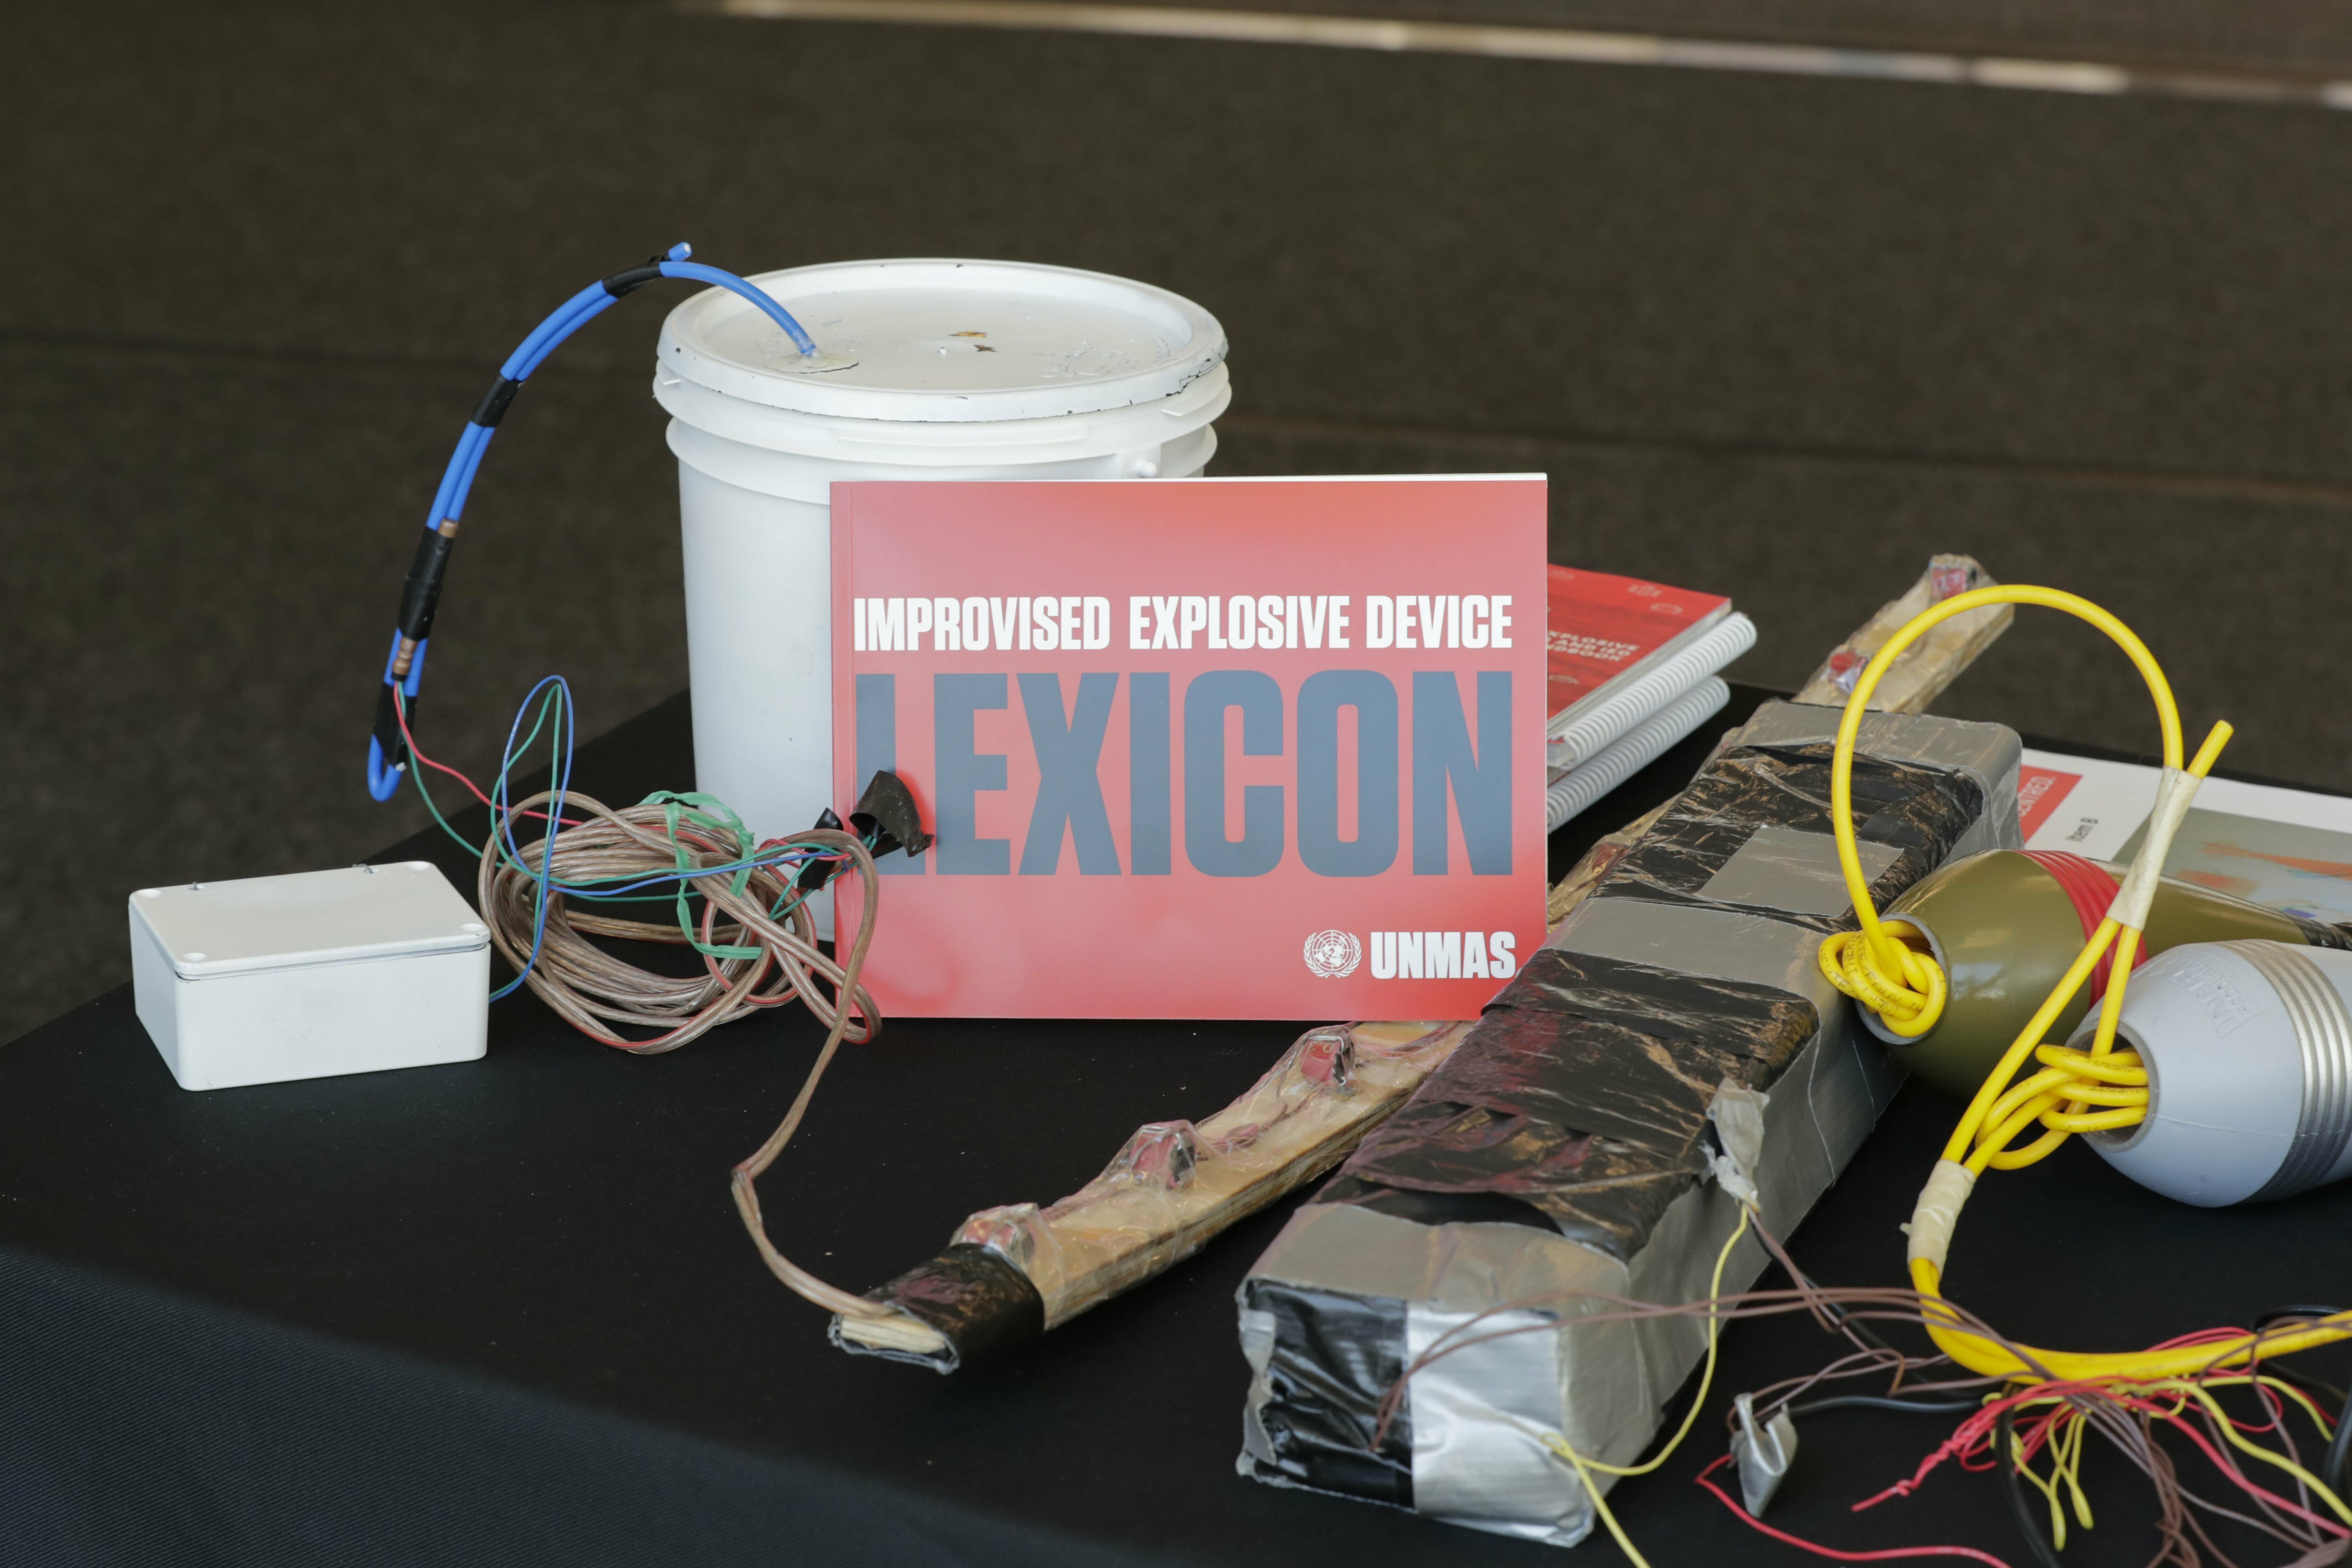 United Nations, New York, USA, April 04, 2019 - Improvised explosive device (IED) today at the UN Headquarters in New York for the International Mine Awareness Day 2019. Photo by: Luiz Rampelotto/EuropaNewswire/picture-alliance/dpa/AP Images